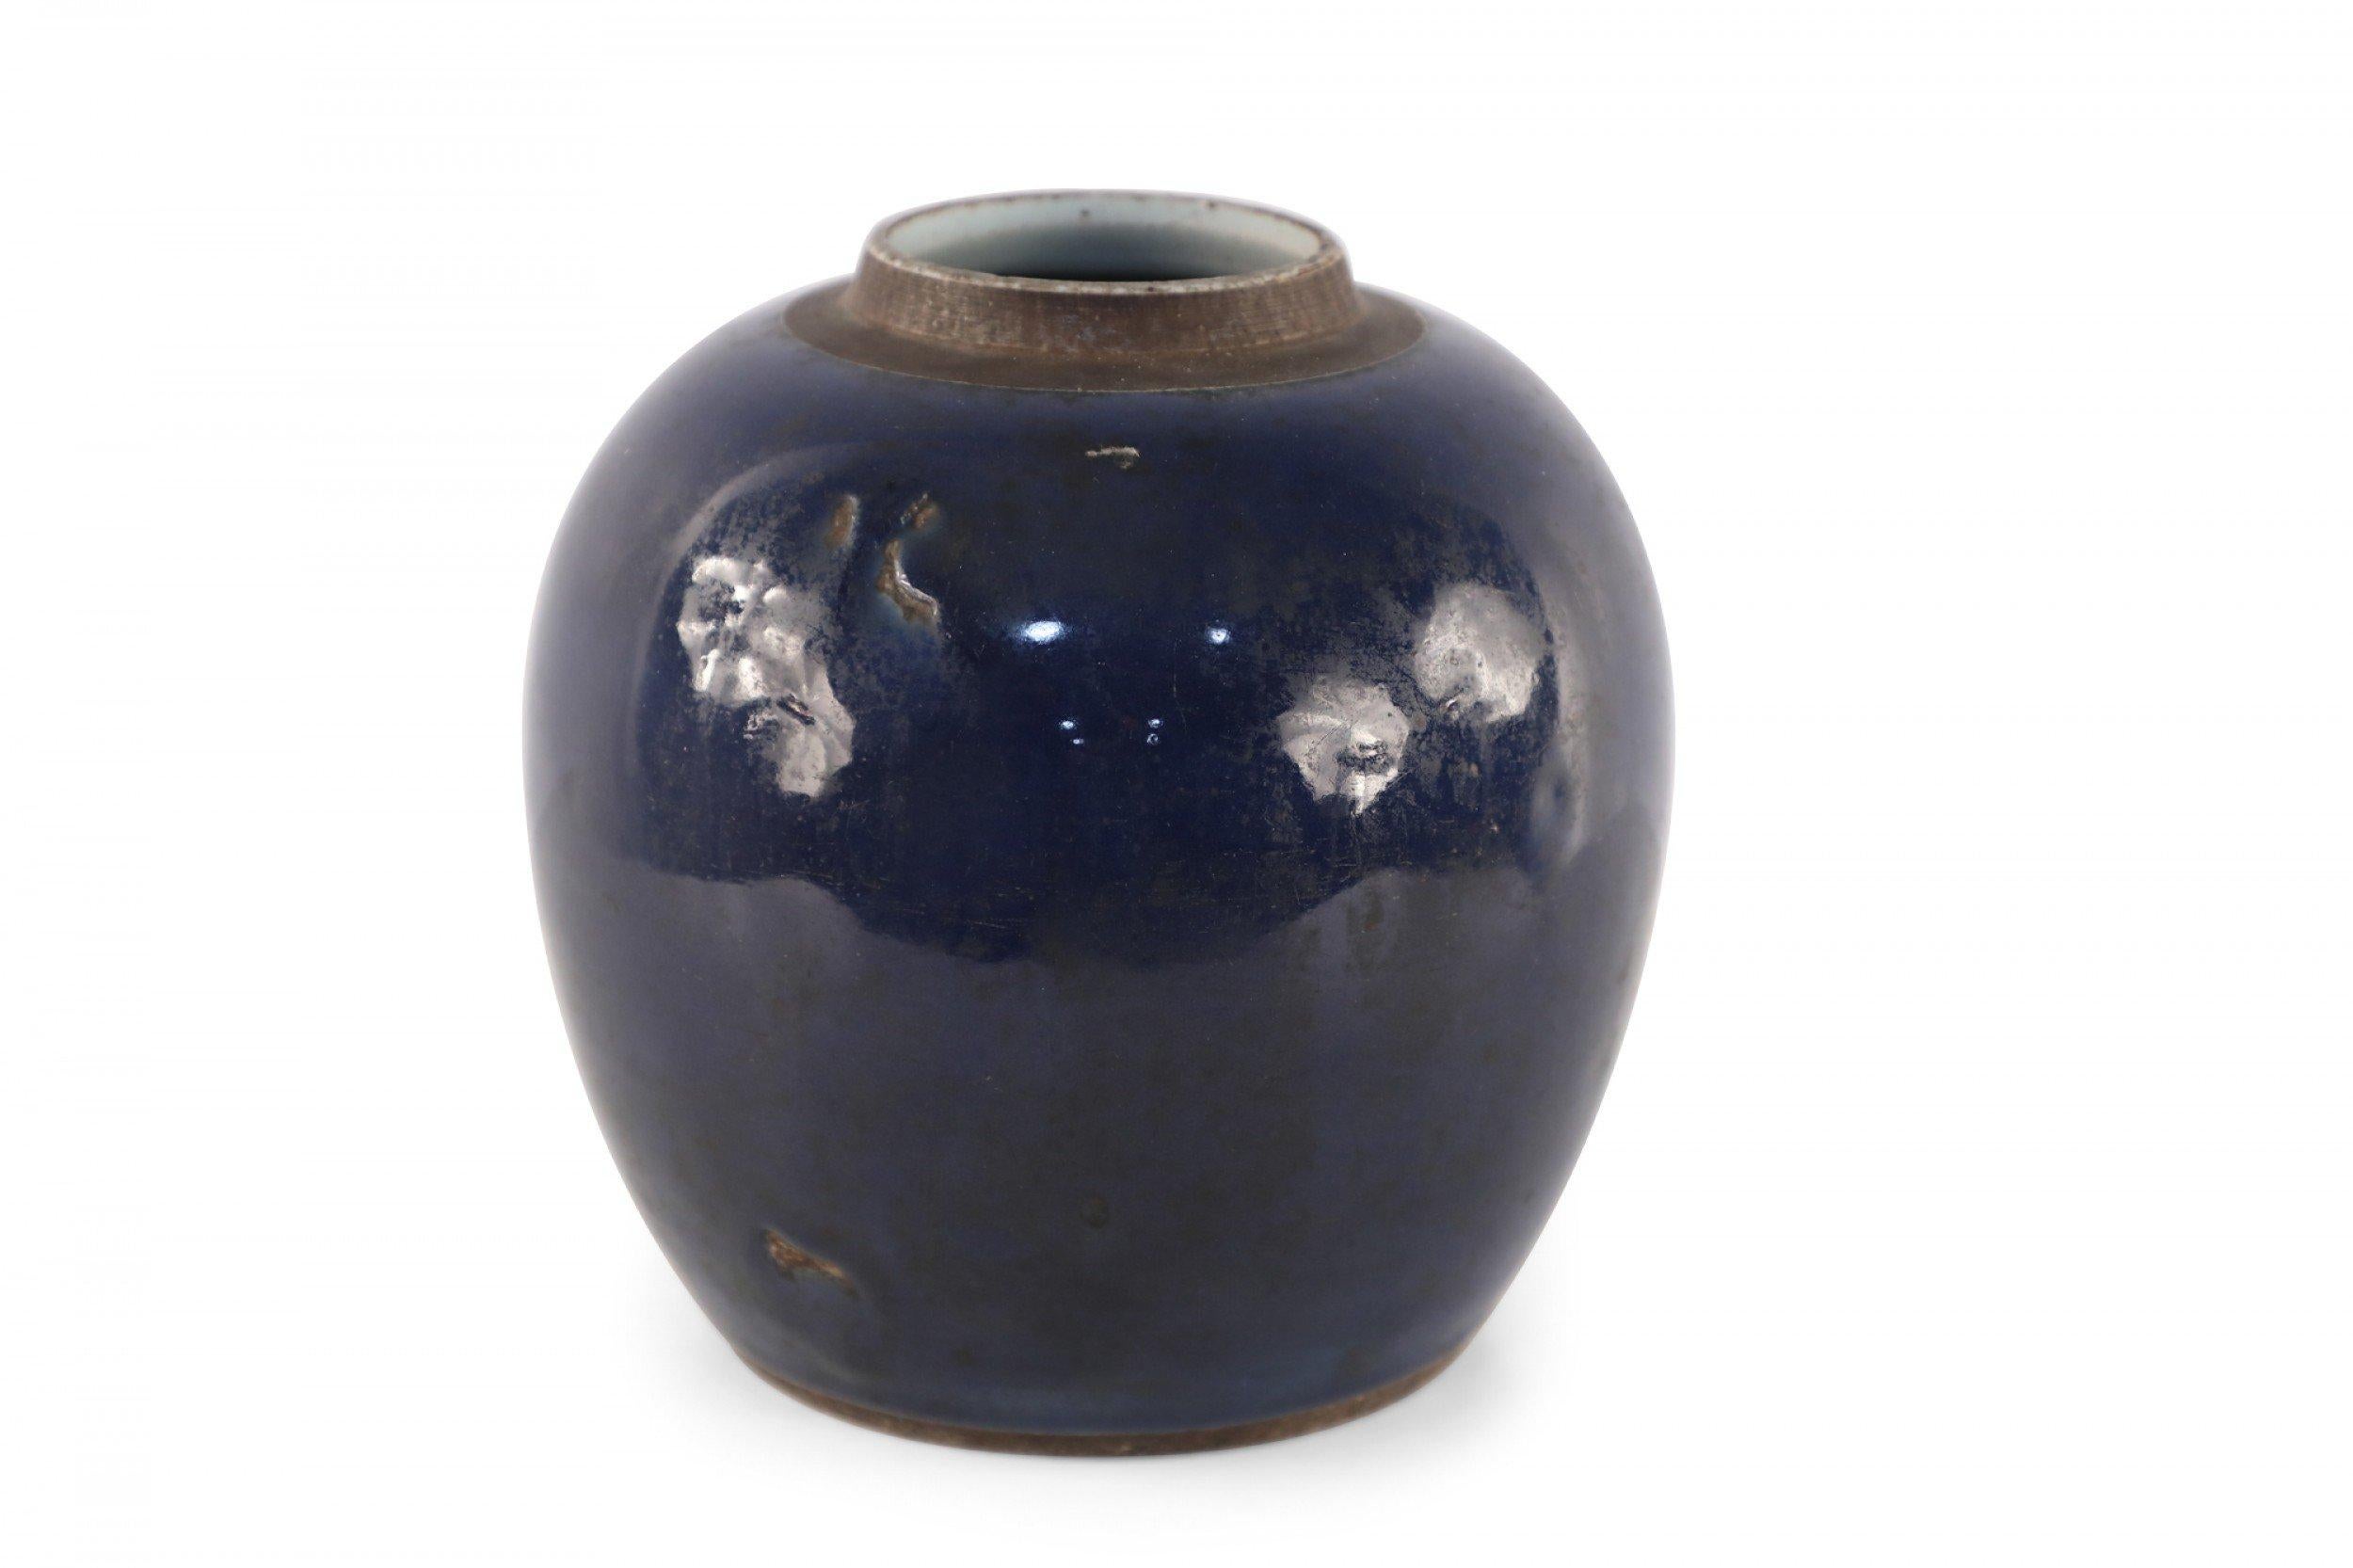 Antique Chinese (Early 20th Century) ceramic ginger jar vase in navy blue with a brown earthenware opening.
 